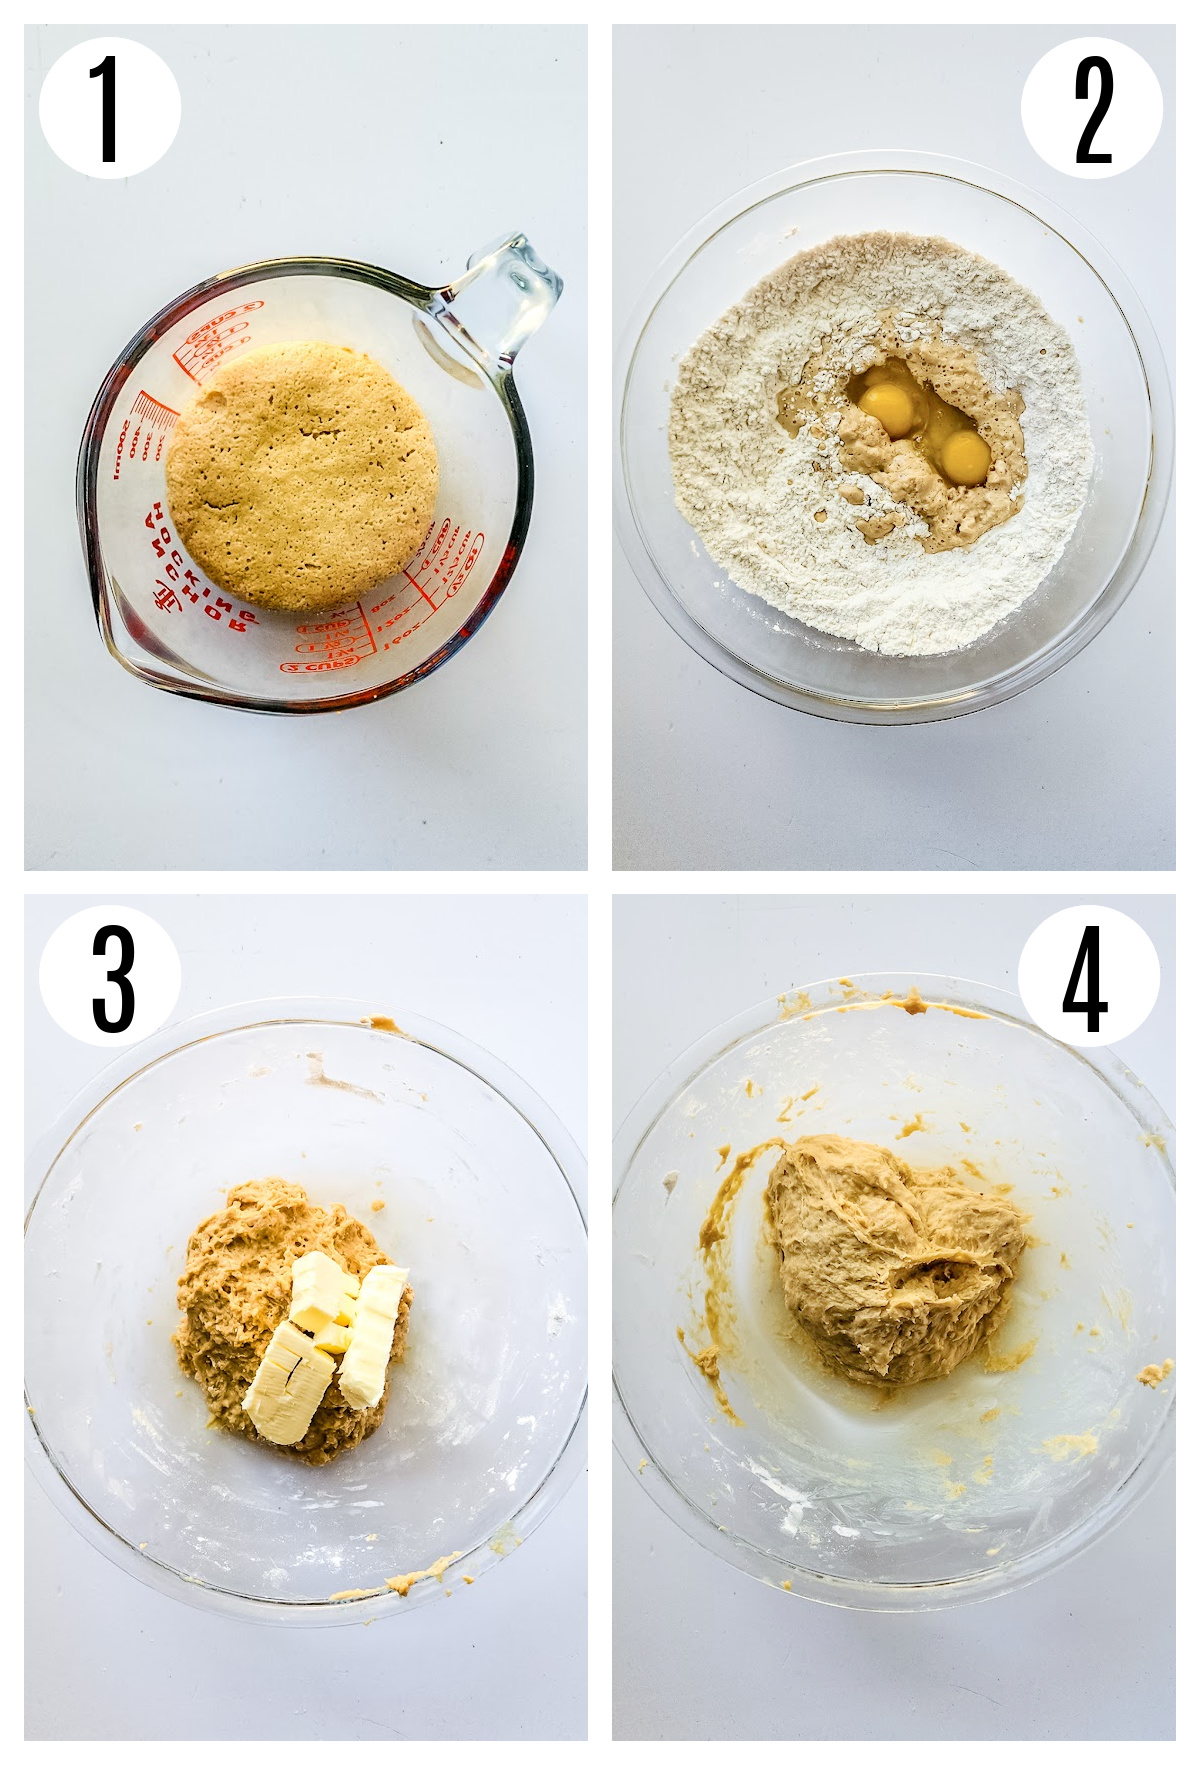 The first four steps of making the bread include proofing the yeast, mixing the dough ingredients and letting the dough rise.